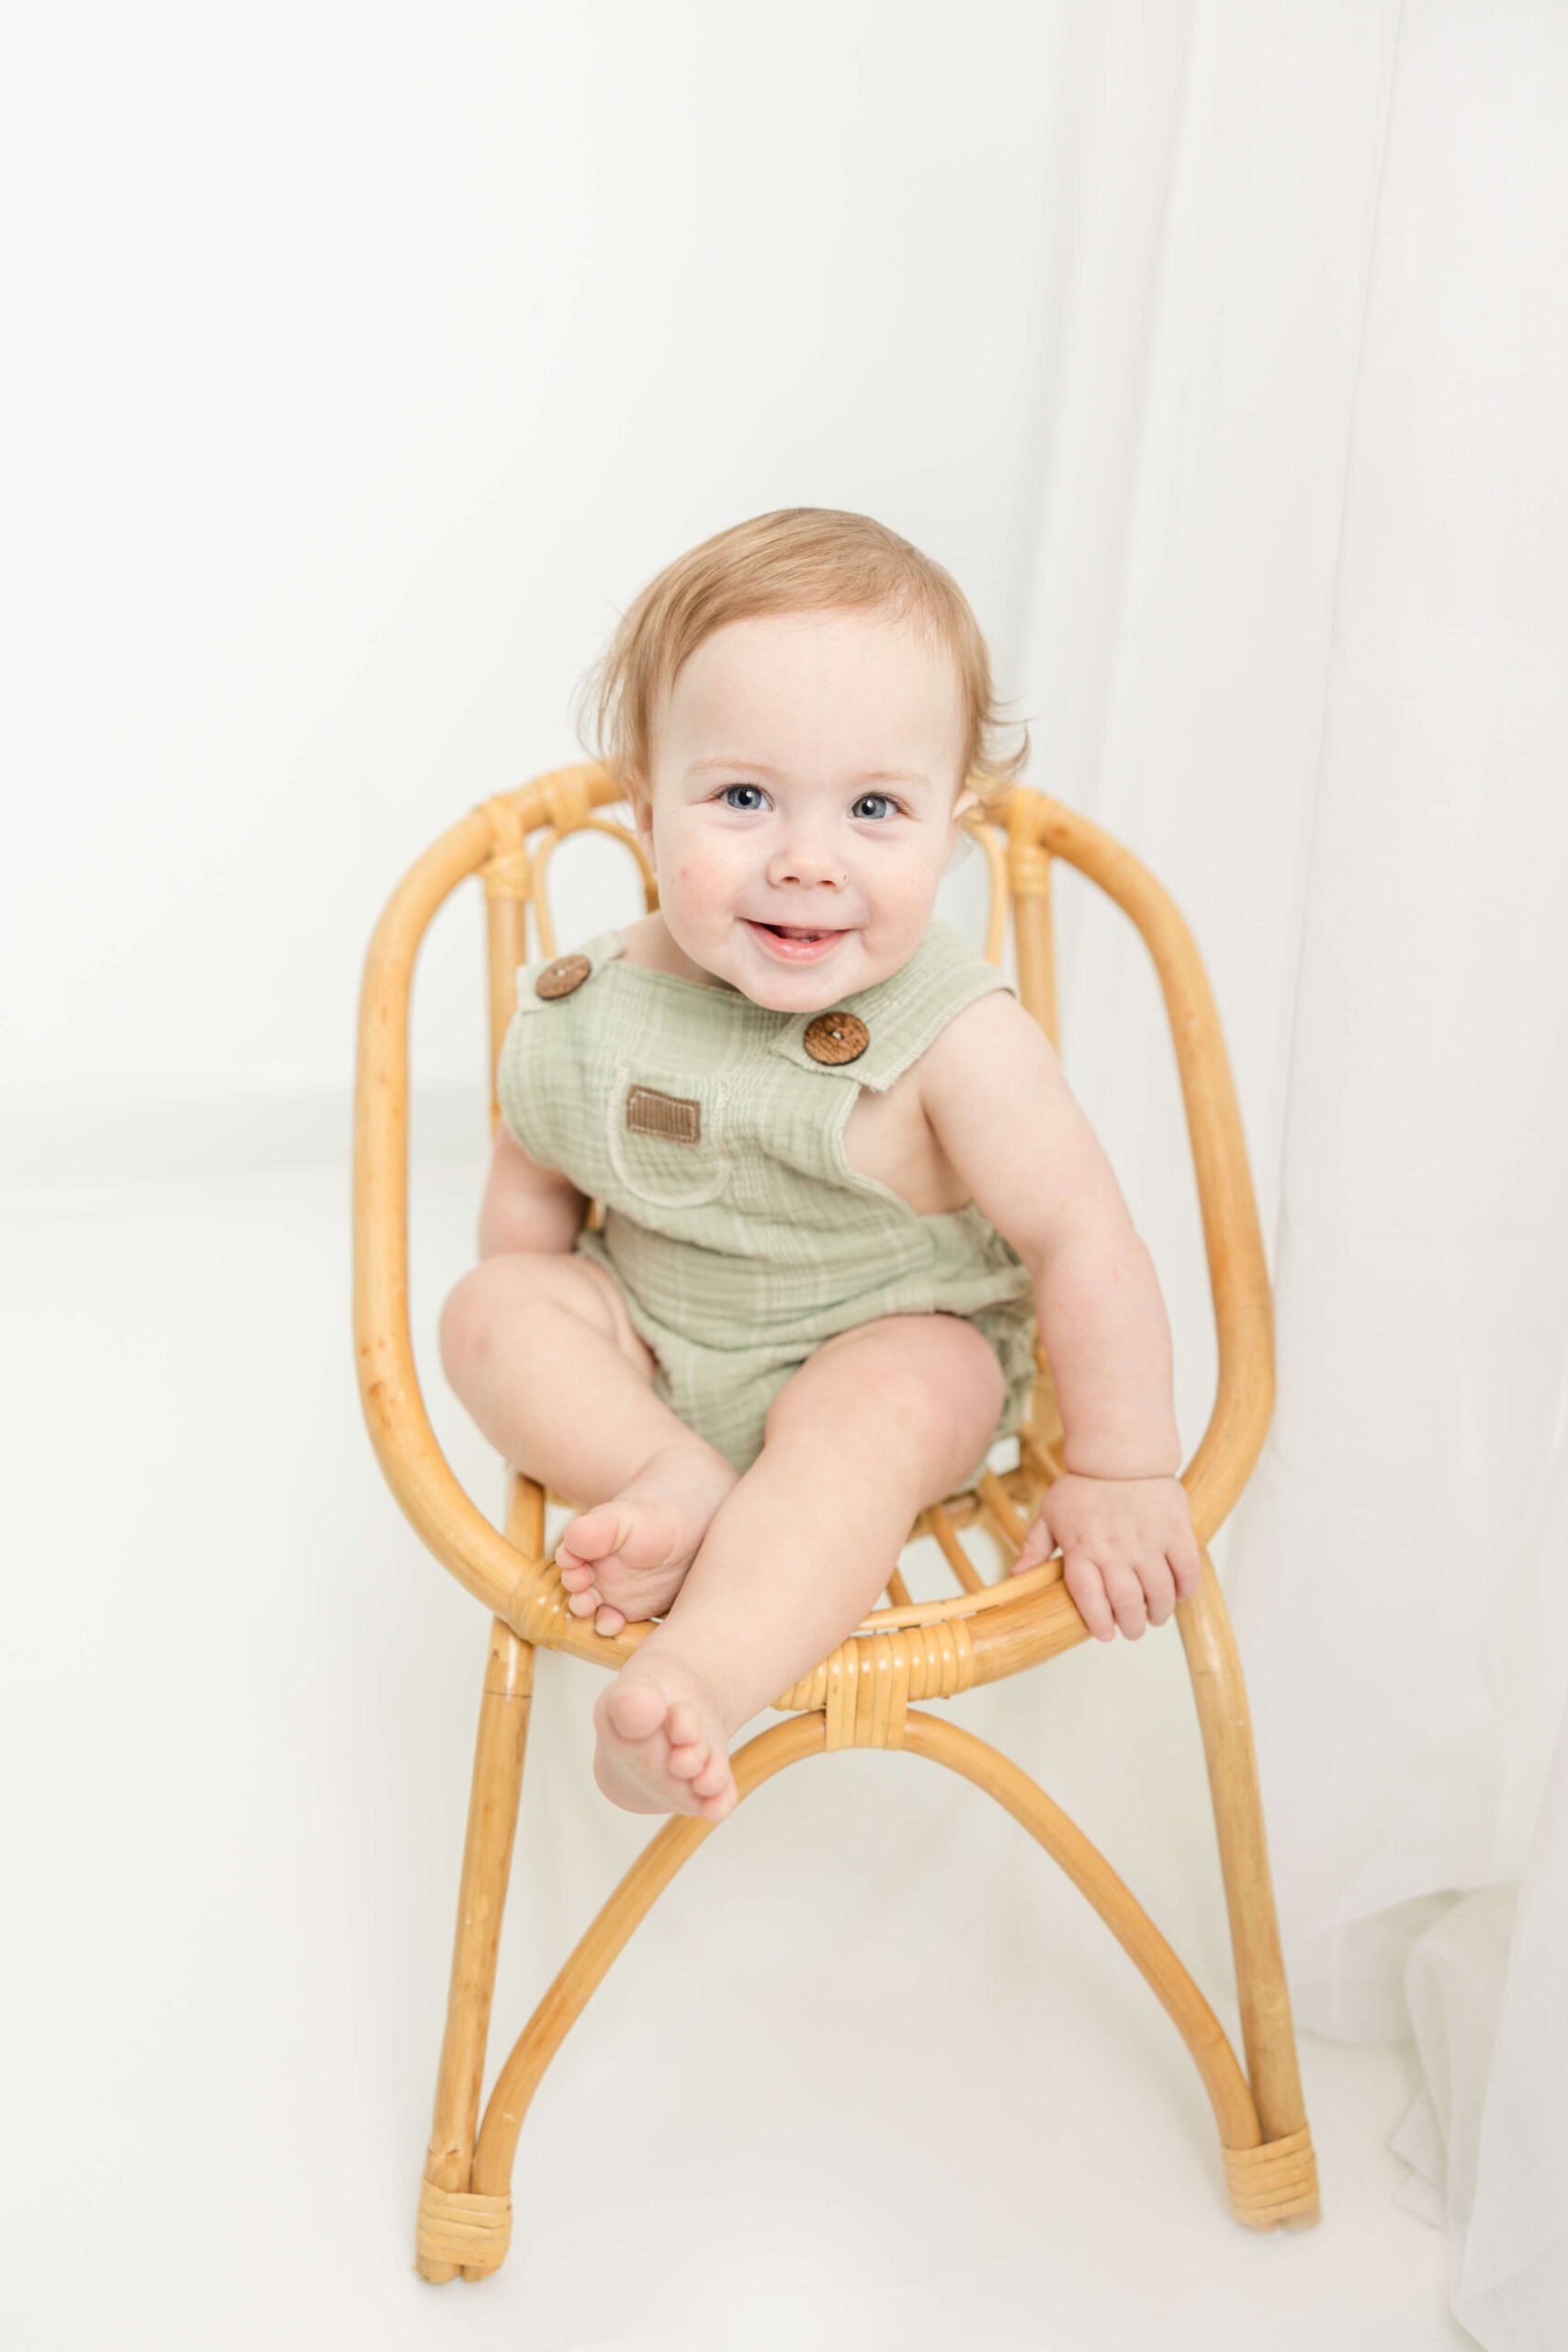 Adorable little boy in a green jumper sitting in a wicker chair during child portrait session with Molly Berry Photography.